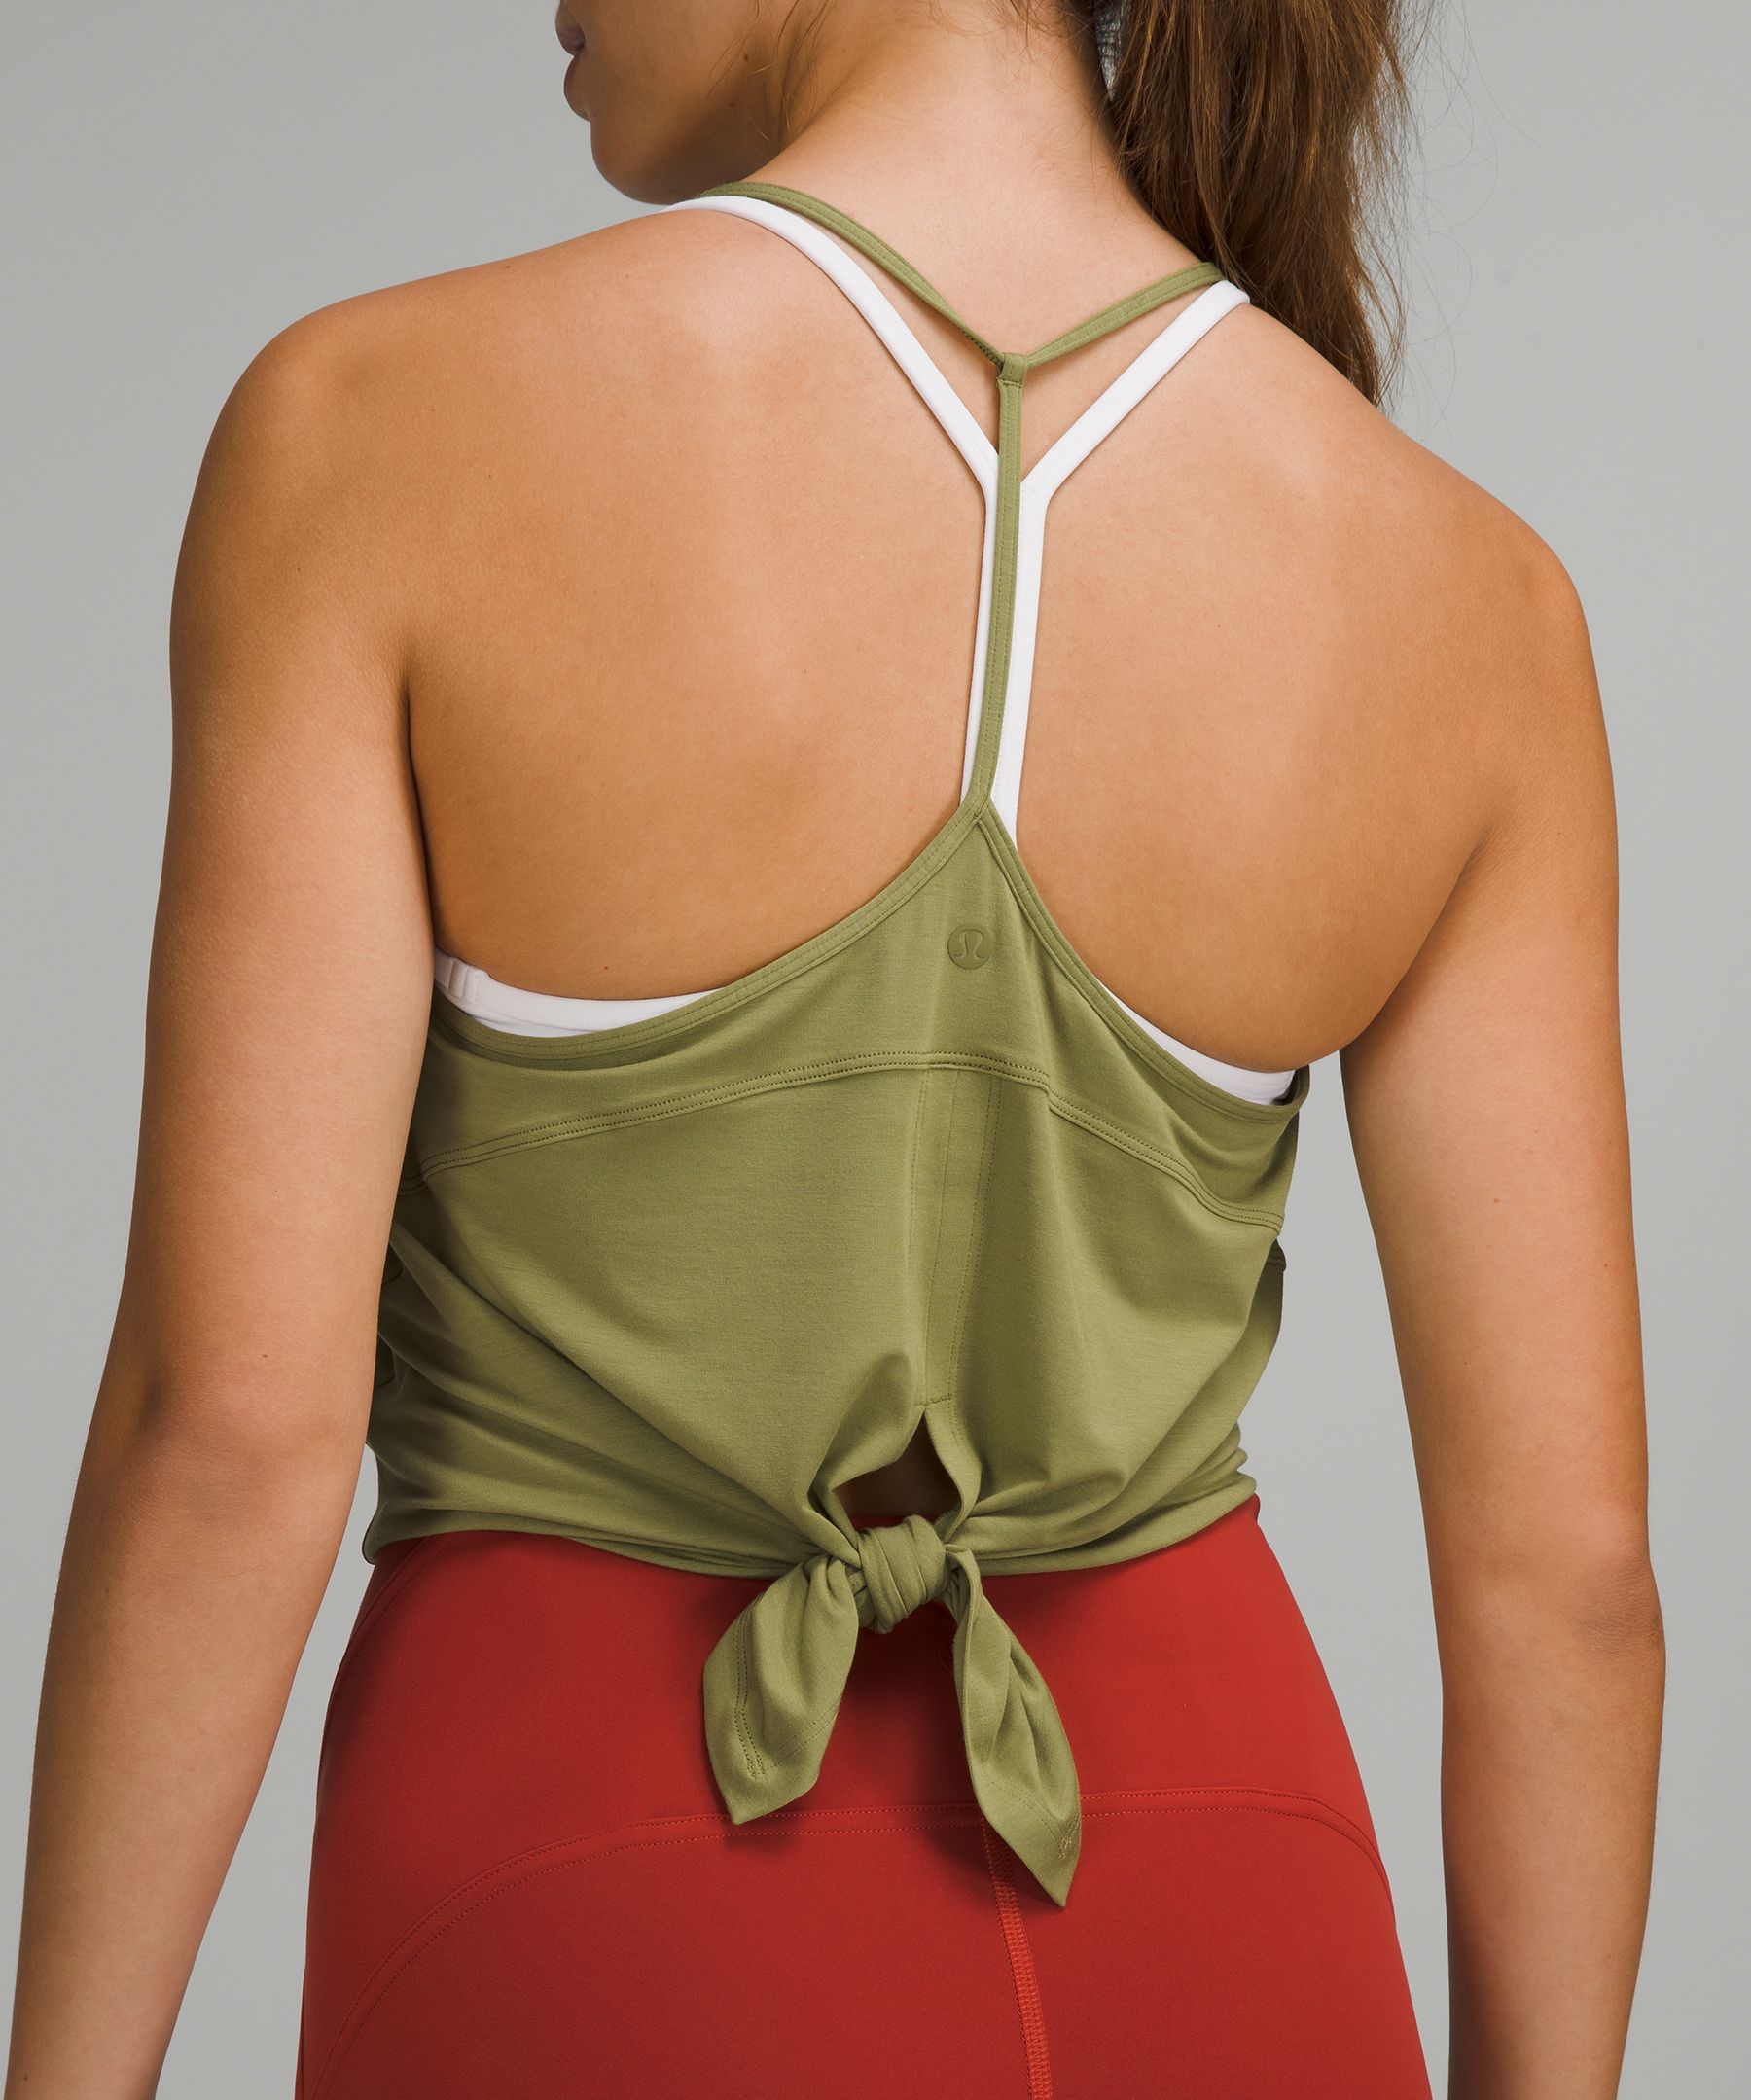 Modal silk yoga tank is fantastic! I just got mine today and I love it. TTS  and it drapes beautifully. Definitely a thinner material, but I'm a sucker  for anything modal. 